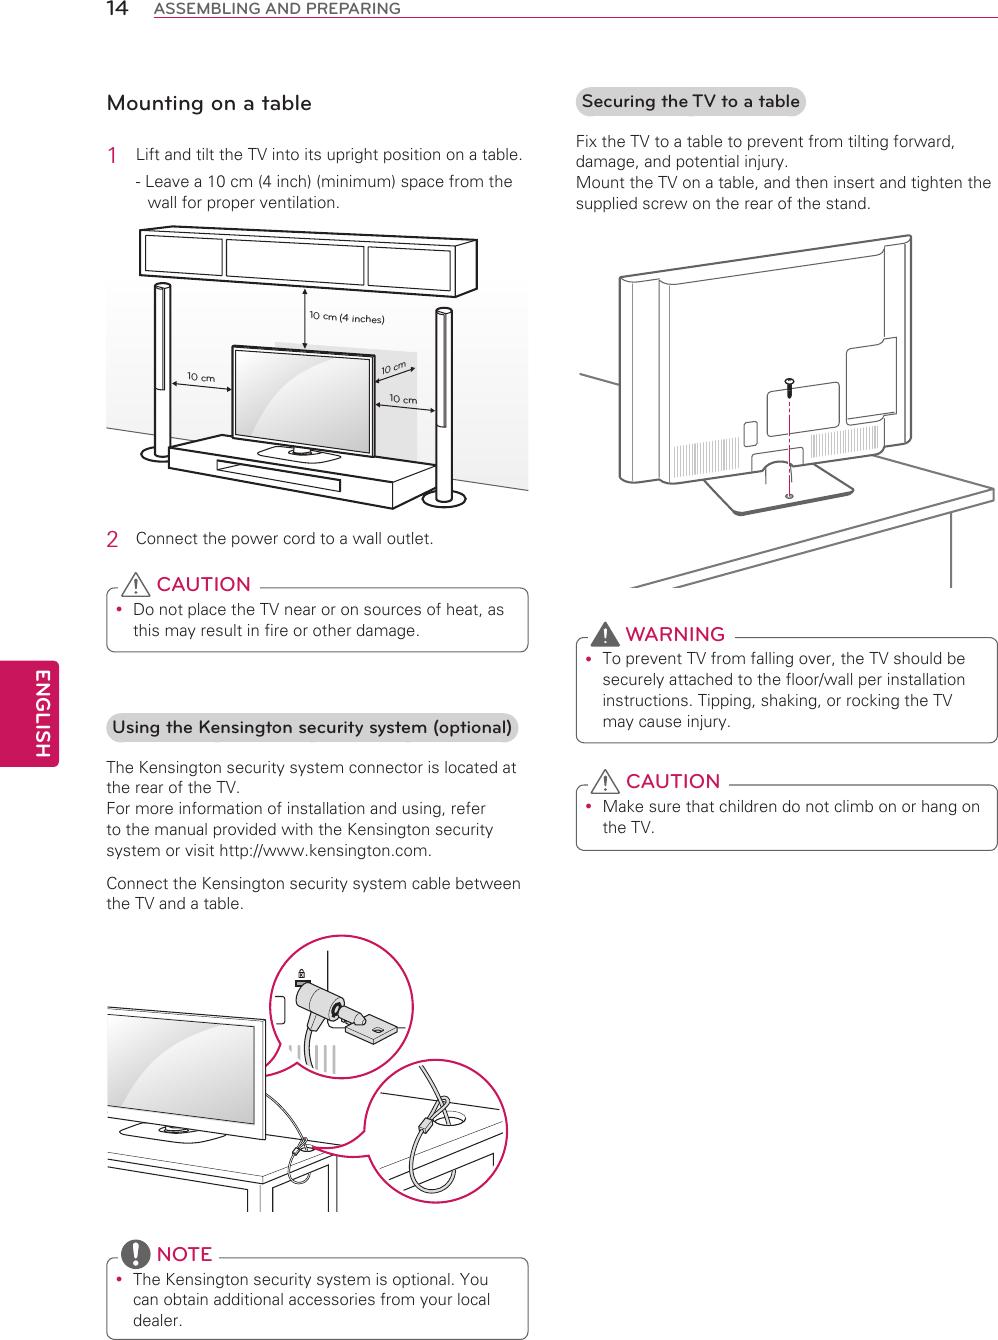 ENGLISH14 ASSEMBLING AND PREPARINGMounting on a table1  Lift and tilt the TV into its upright position on a table.- Leave a 10 cm (4 inch) (minimum) space from the wall for proper ventilation.10 cm10 cm10 cm10 cm(4 inches)2  Connect the power cord to a wall outlet. Do not place the TV near or on sources of heat, as this may result in fire or other damage. CAUTIONSecuring the TV to a tableFix the TV to a table to prevent from tilting forward, damage, and potential injury. Mount the TV on a table, and then insert and tighten the supplied screw on the rear of the stand. To prevent TV from falling over, the TV should be securely attached to the floor/wall per installation instructions. Tipping, shaking, or rocking the TV may cause injury. WARNING Make sure that children do not climb on or hang on the TV. CAUTIONUsing the Kensington security system (optional)The Kensington security system connector is located at the rear of the TV.  For more information of installation and using, refer to the manual provided with the Kensington security system or visit http://www.kensington.com.Connect the Kensington security system cable between the TV and a table. The Kensington security system is optional. You can obtain additional accessories from your local dealer. NOTE